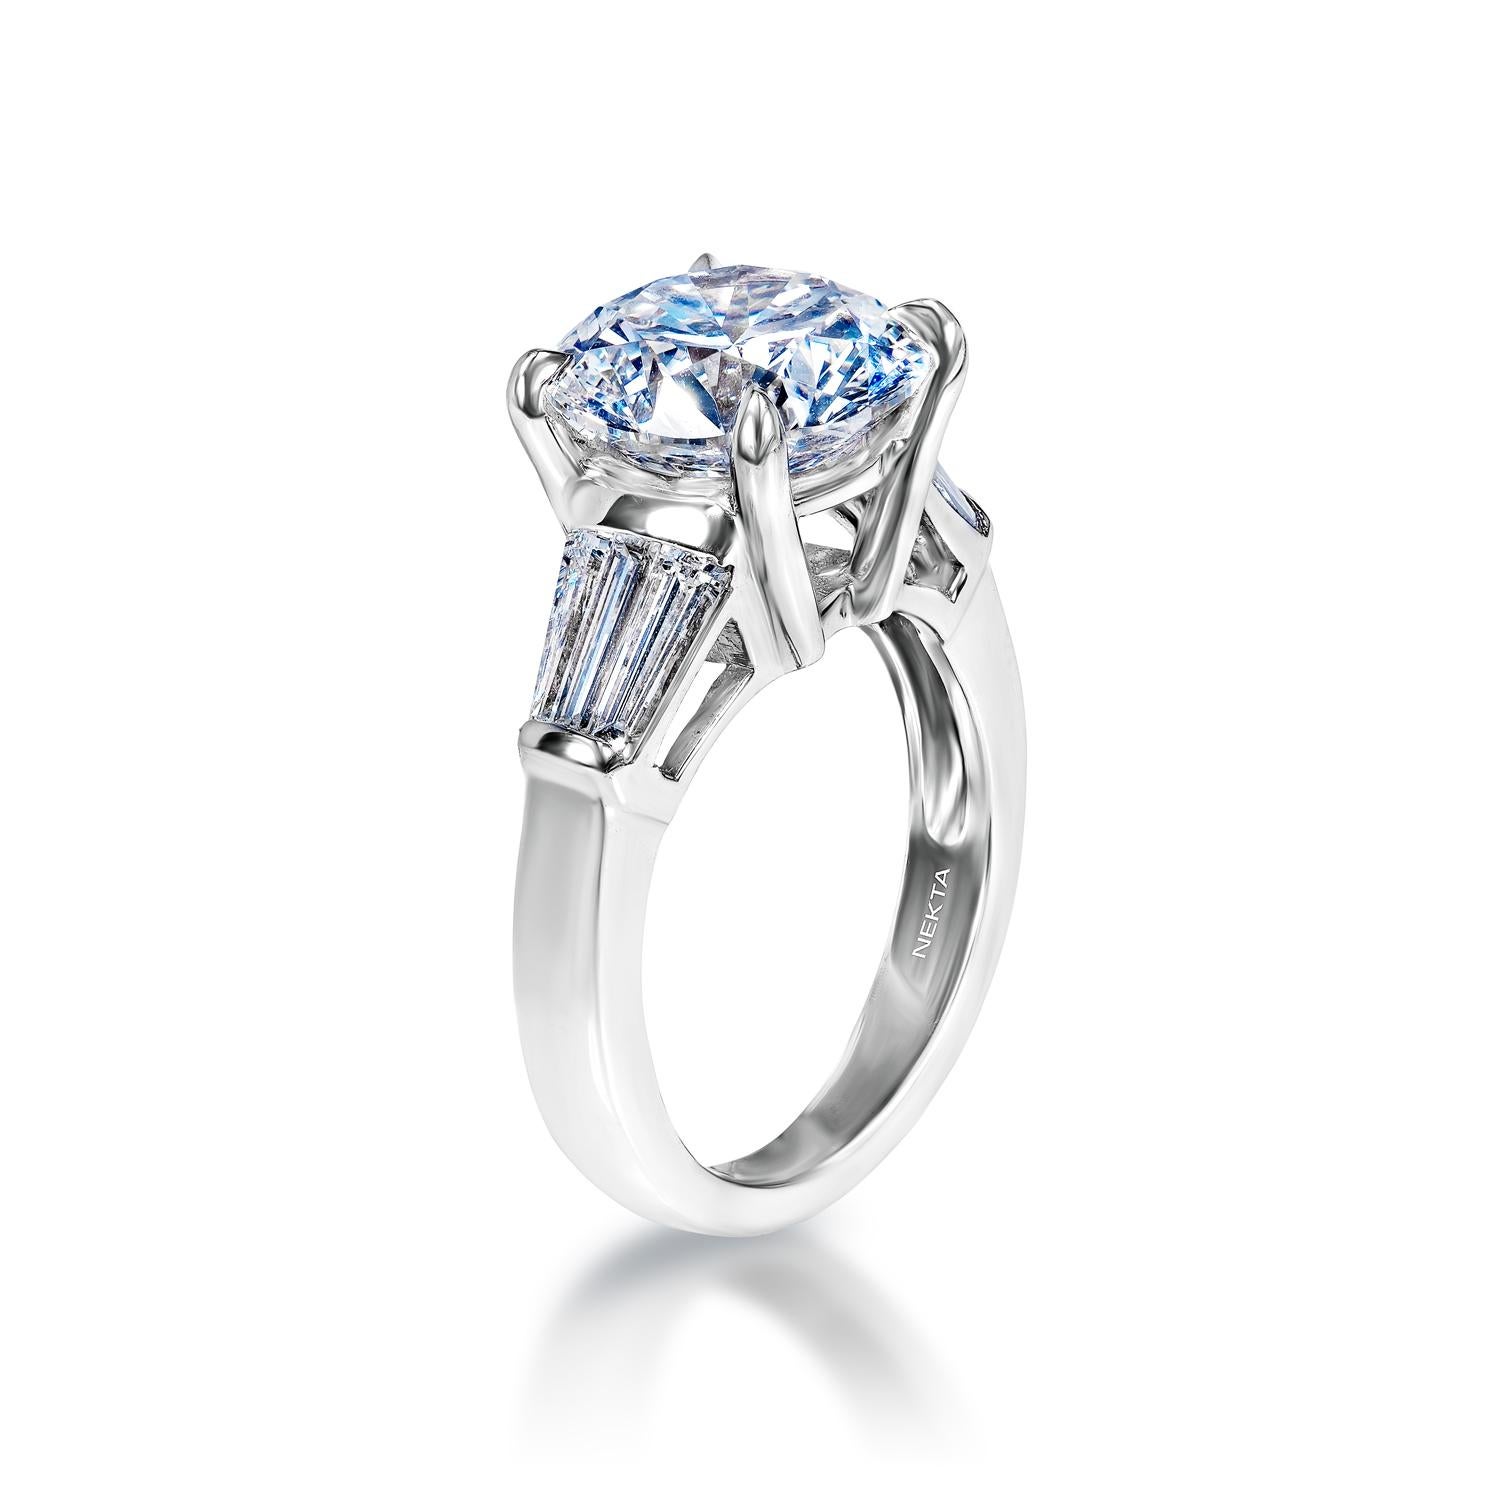 Round Cut 6 Carat Round Brilliant Diamond Engagement Ring Certified E VS1 For Sale